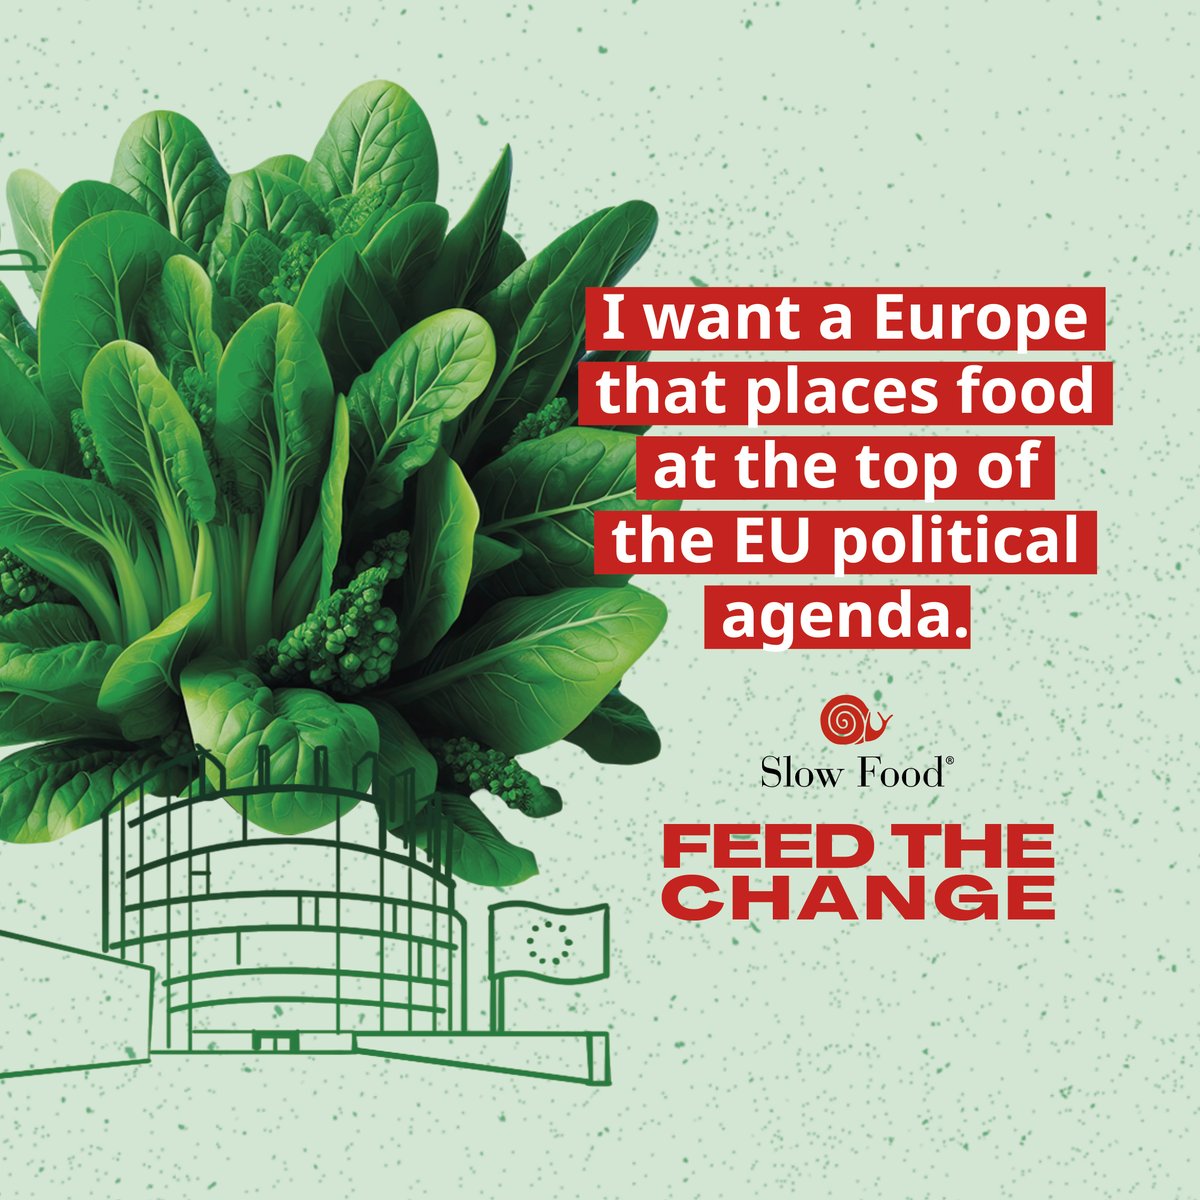 4 reasons why the EU should put food at the ♥️ of its political agenda: ❤️‍🩹 Protecting Human Health 🌱 Saving Nature & Fighting #ClimateChange 👨‍🌾 Helping Farmers & Rural Areas 🤝 Fostering Social Justice Our article bit.ly/3QqNtWu #EUElections #FeedTheChange #UseYourVote